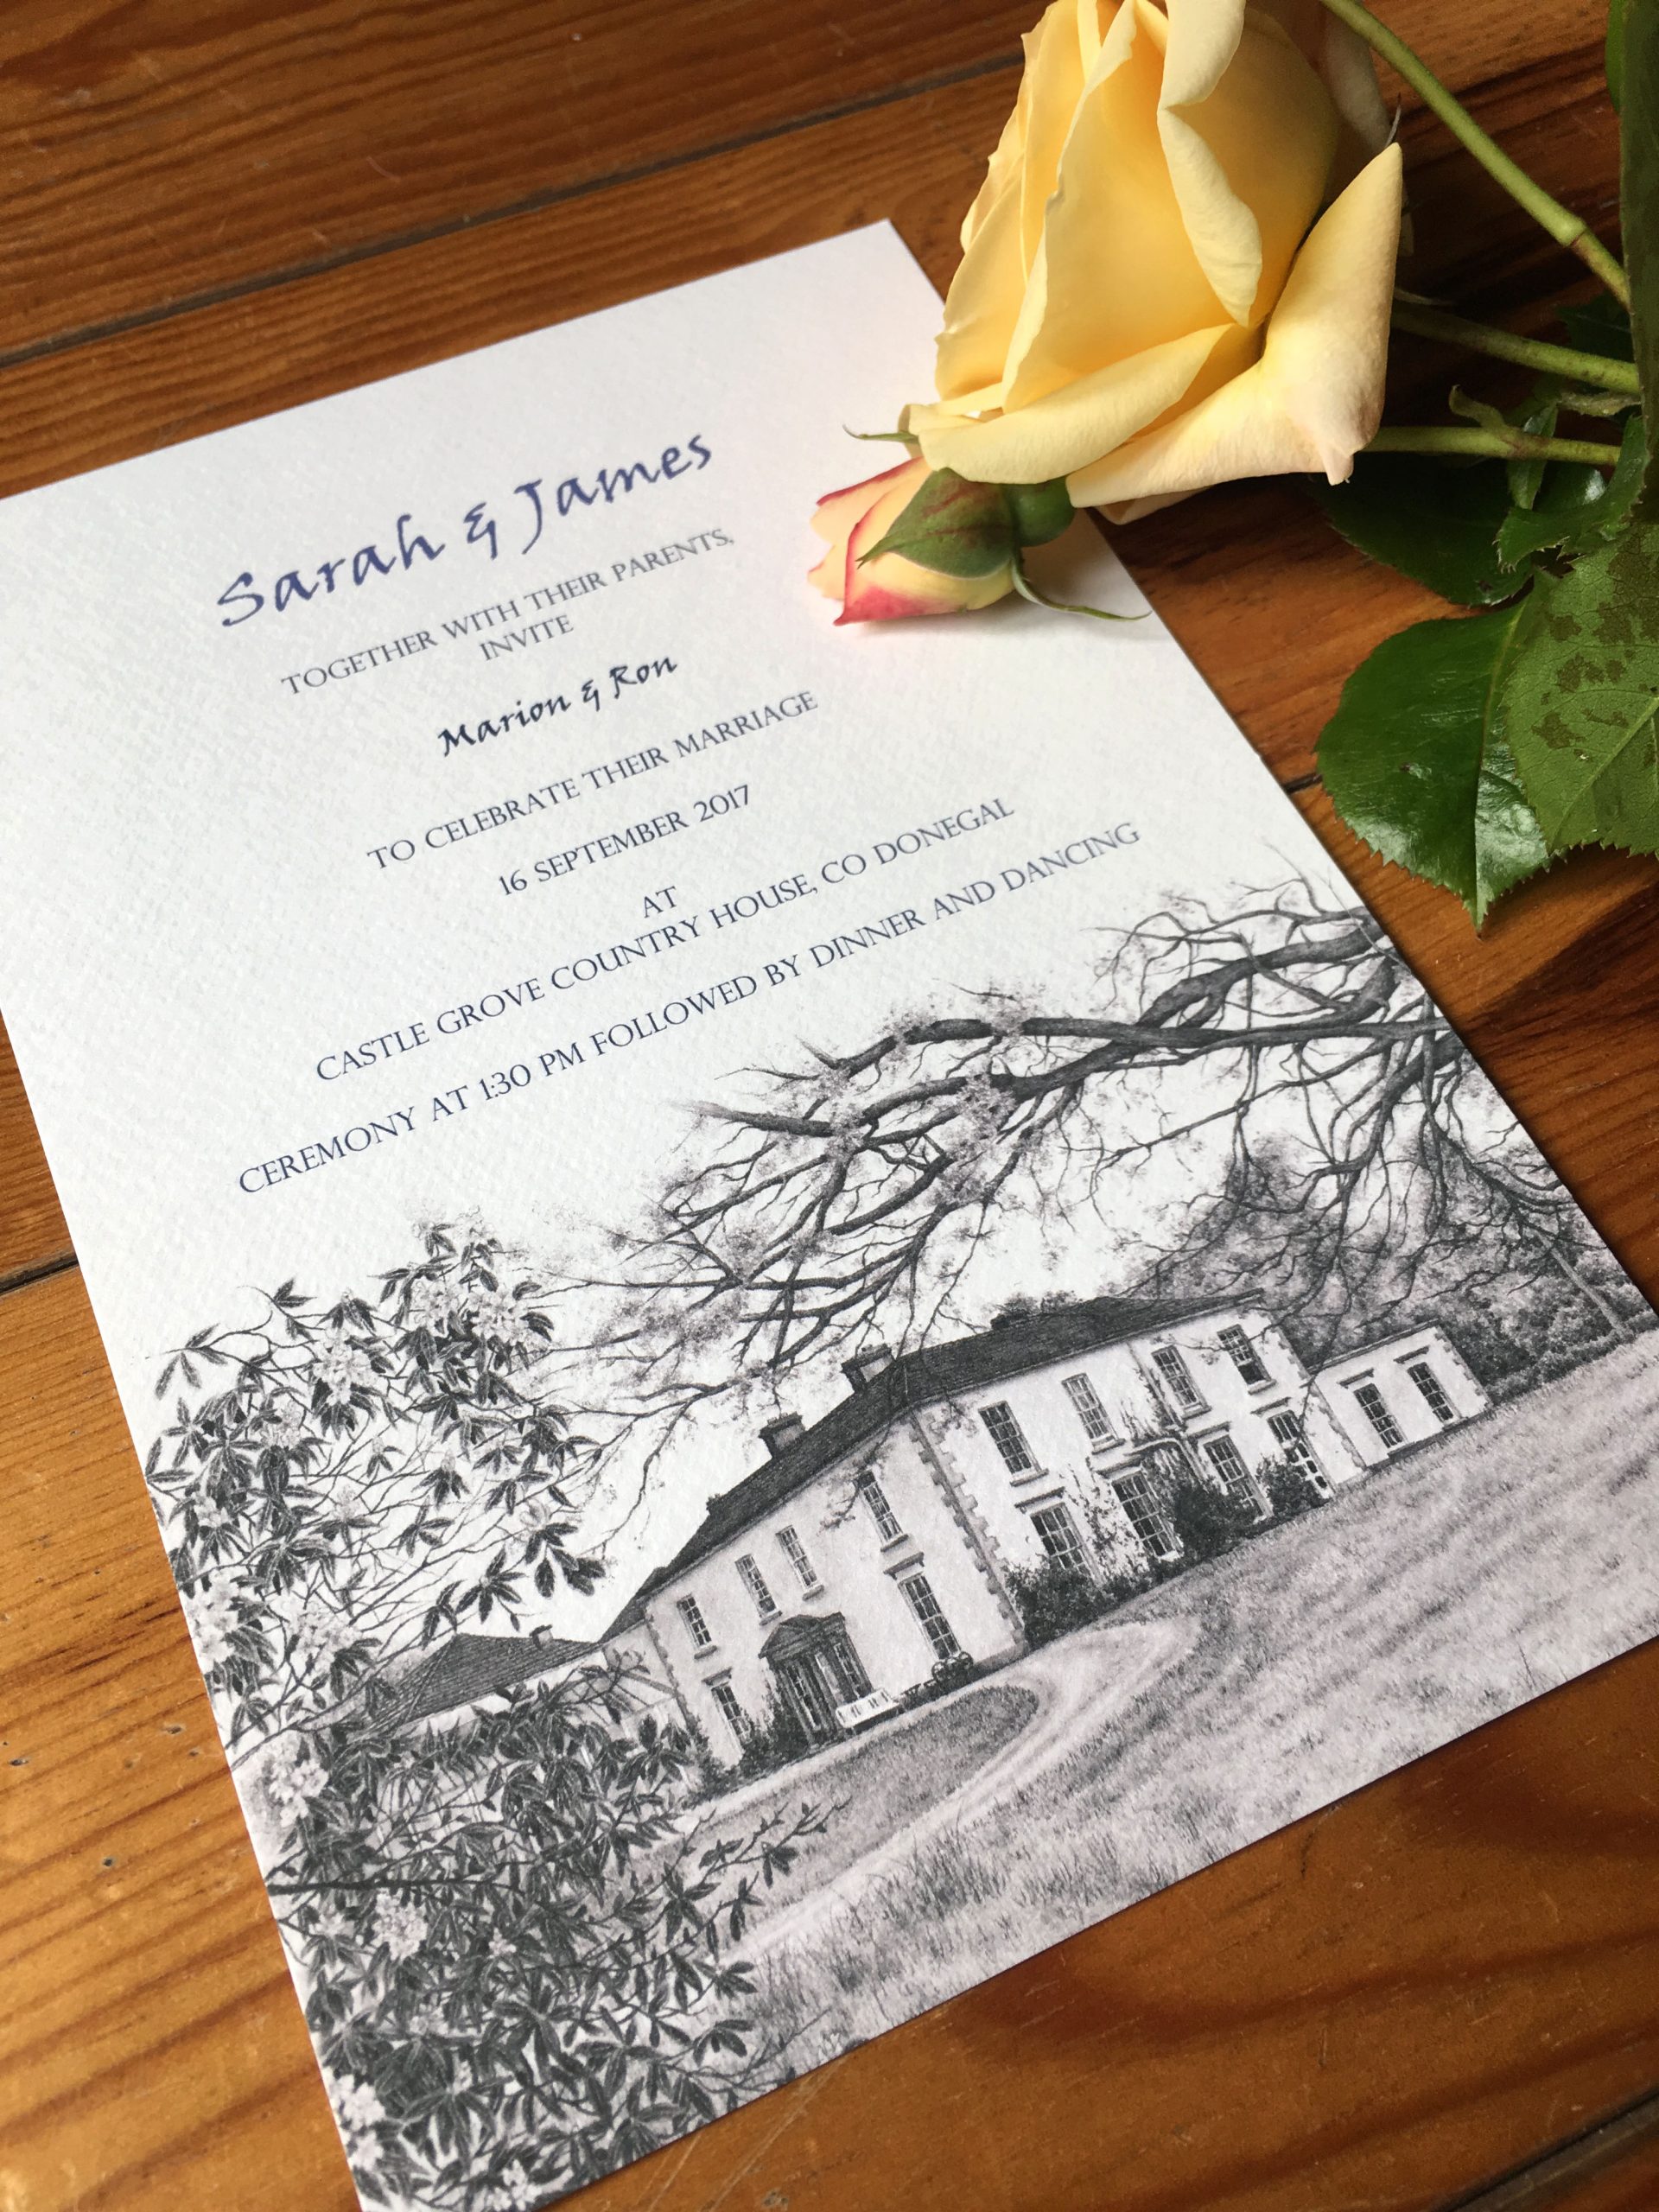 Sarah and James - Wedding invitations by Gilly